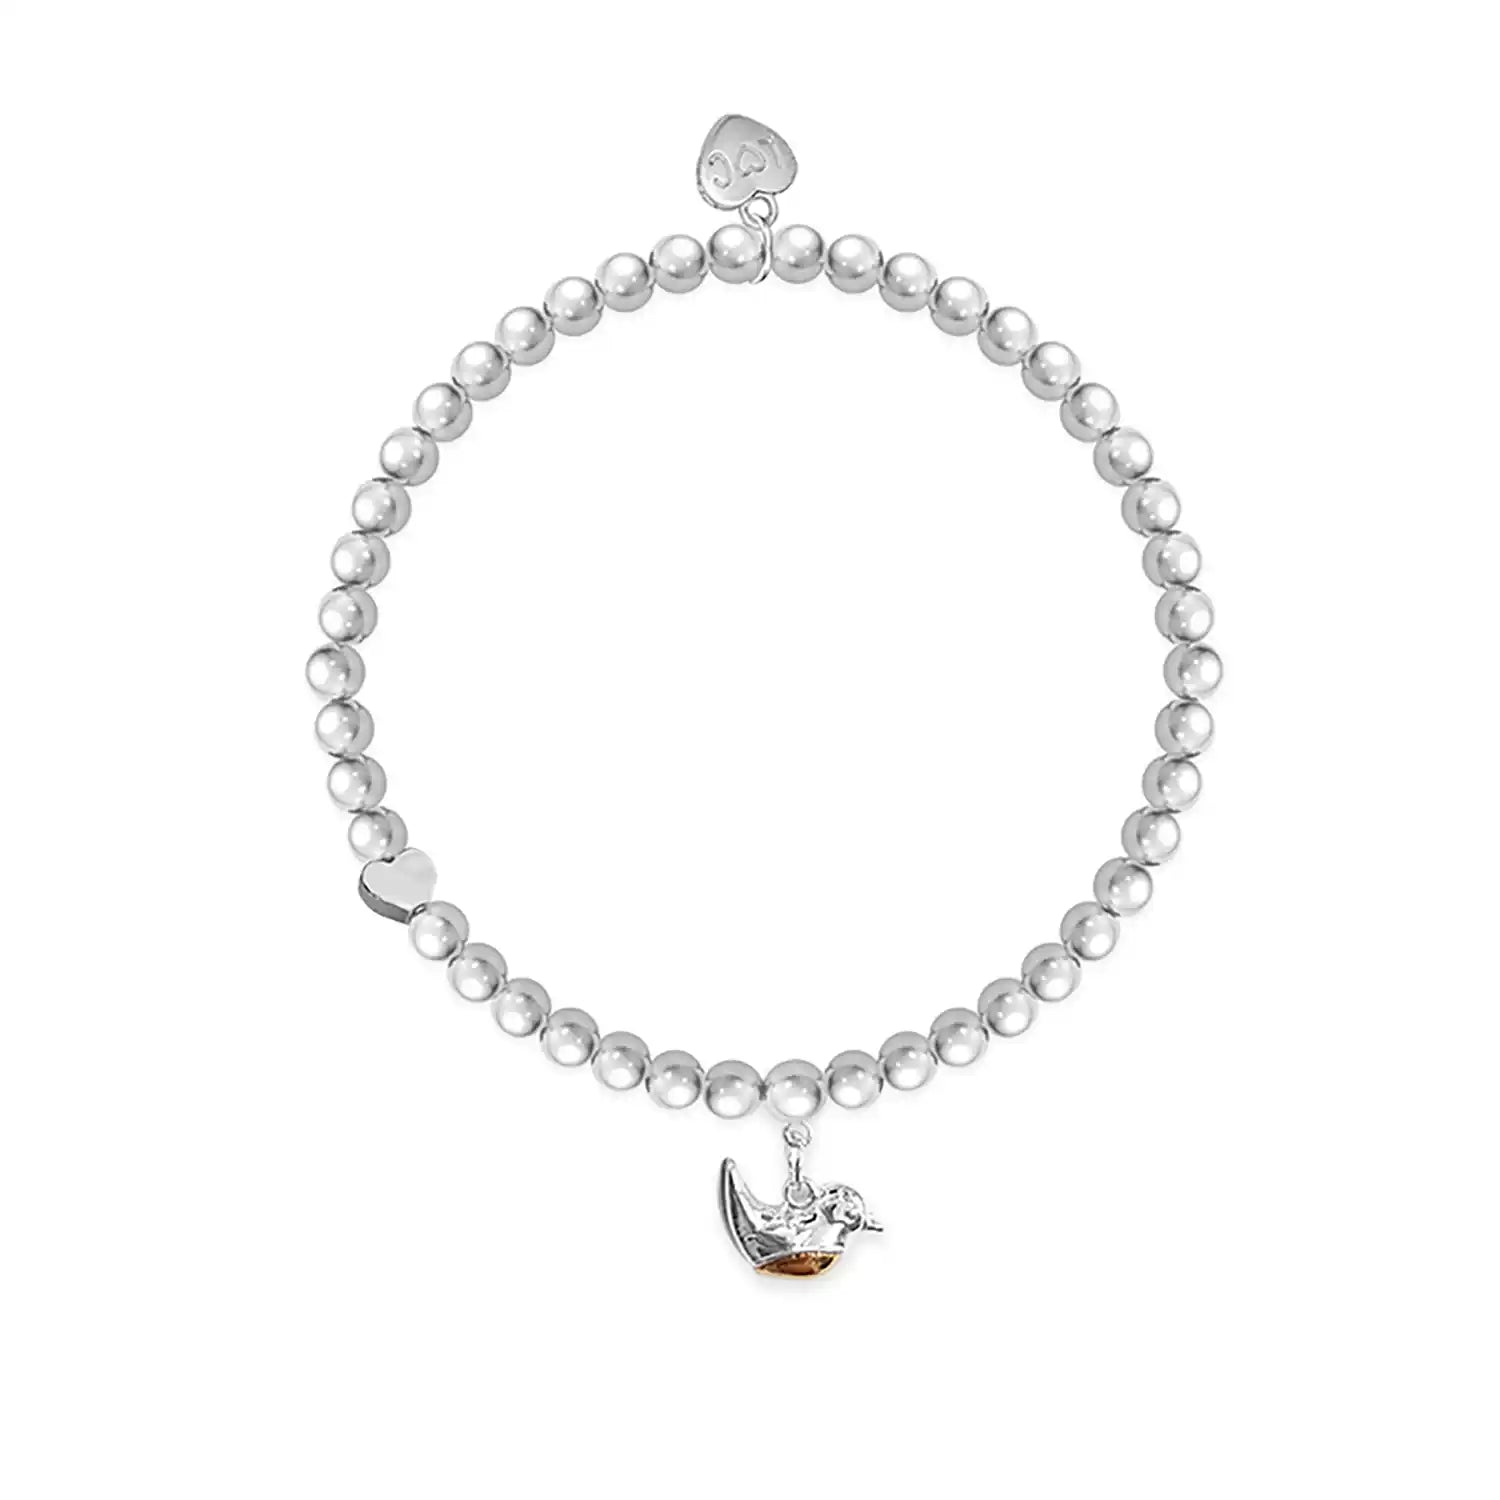 Life Charms Robins Appear Bracelet - Silver 1 Shaws Department Stores